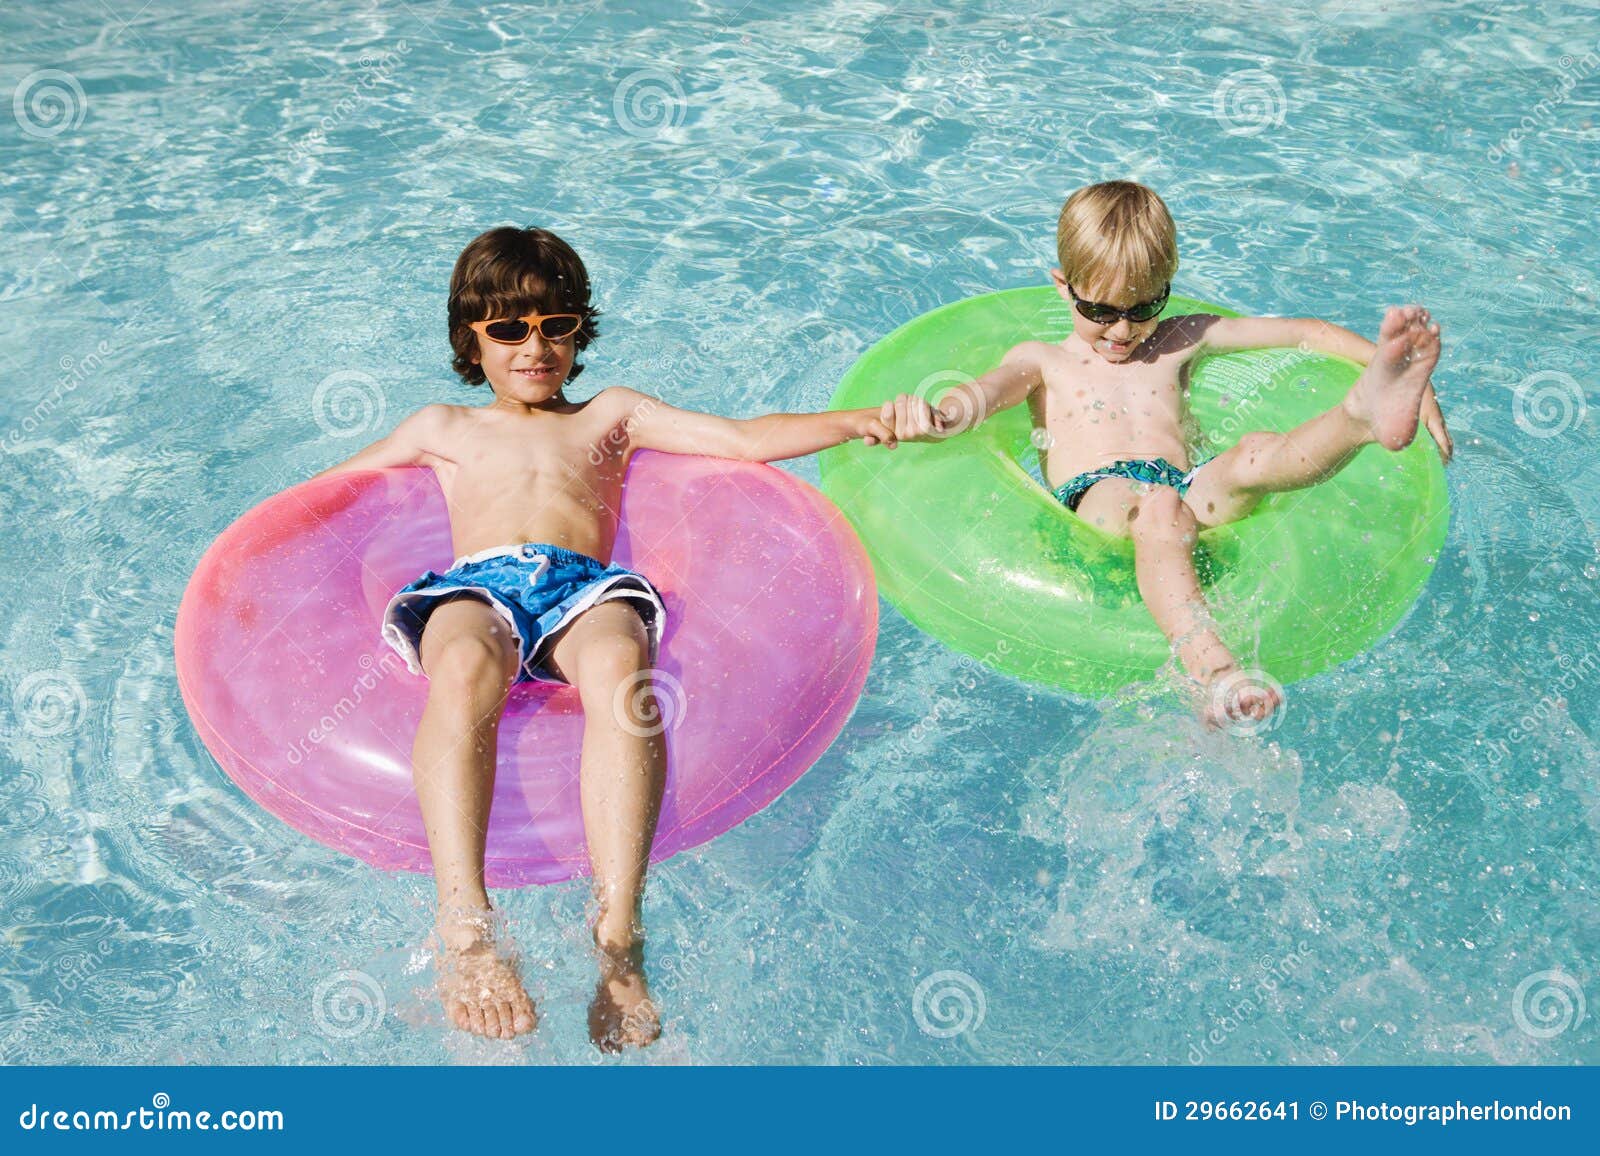 Boys on Float Tubes in Swimming Pool Stock Image - Image of